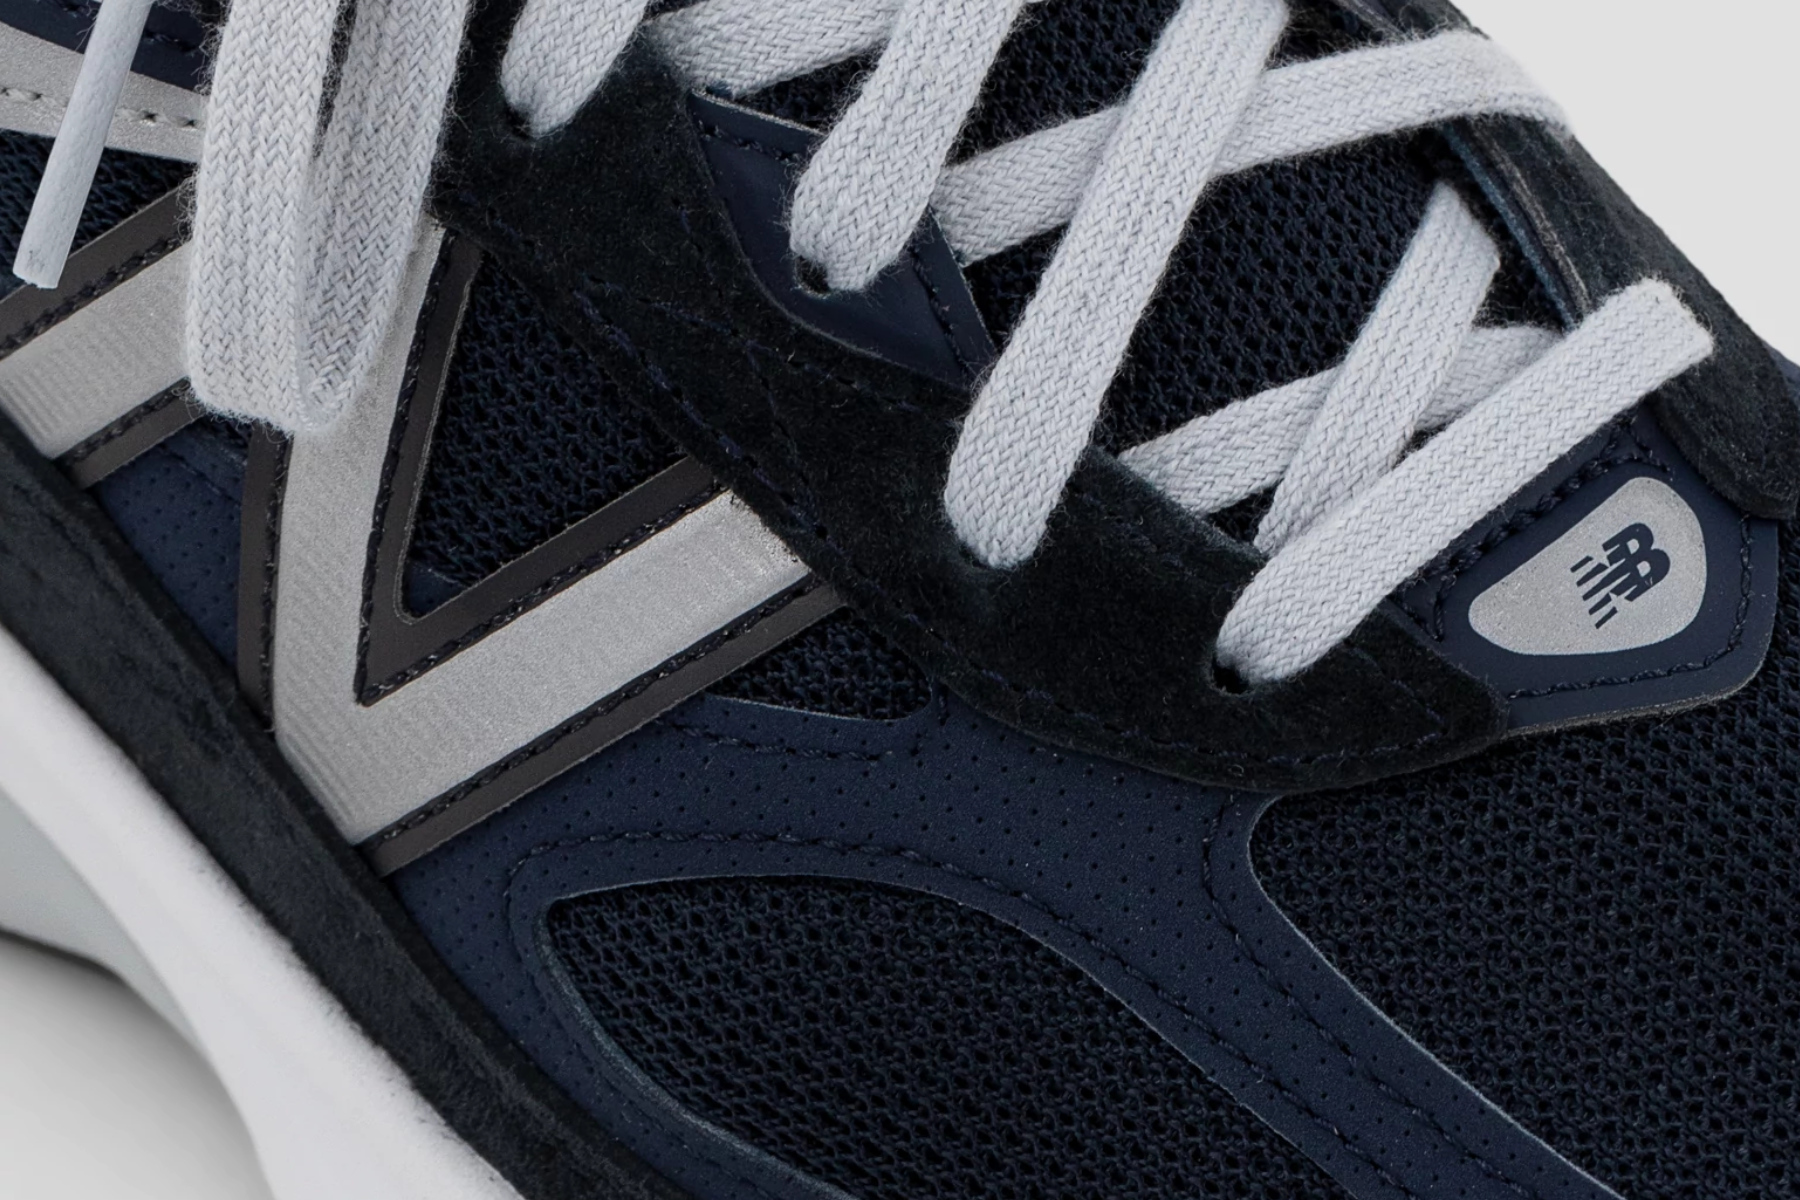 New Balance 990v6 navy/white is the most perfect boring sneaker.